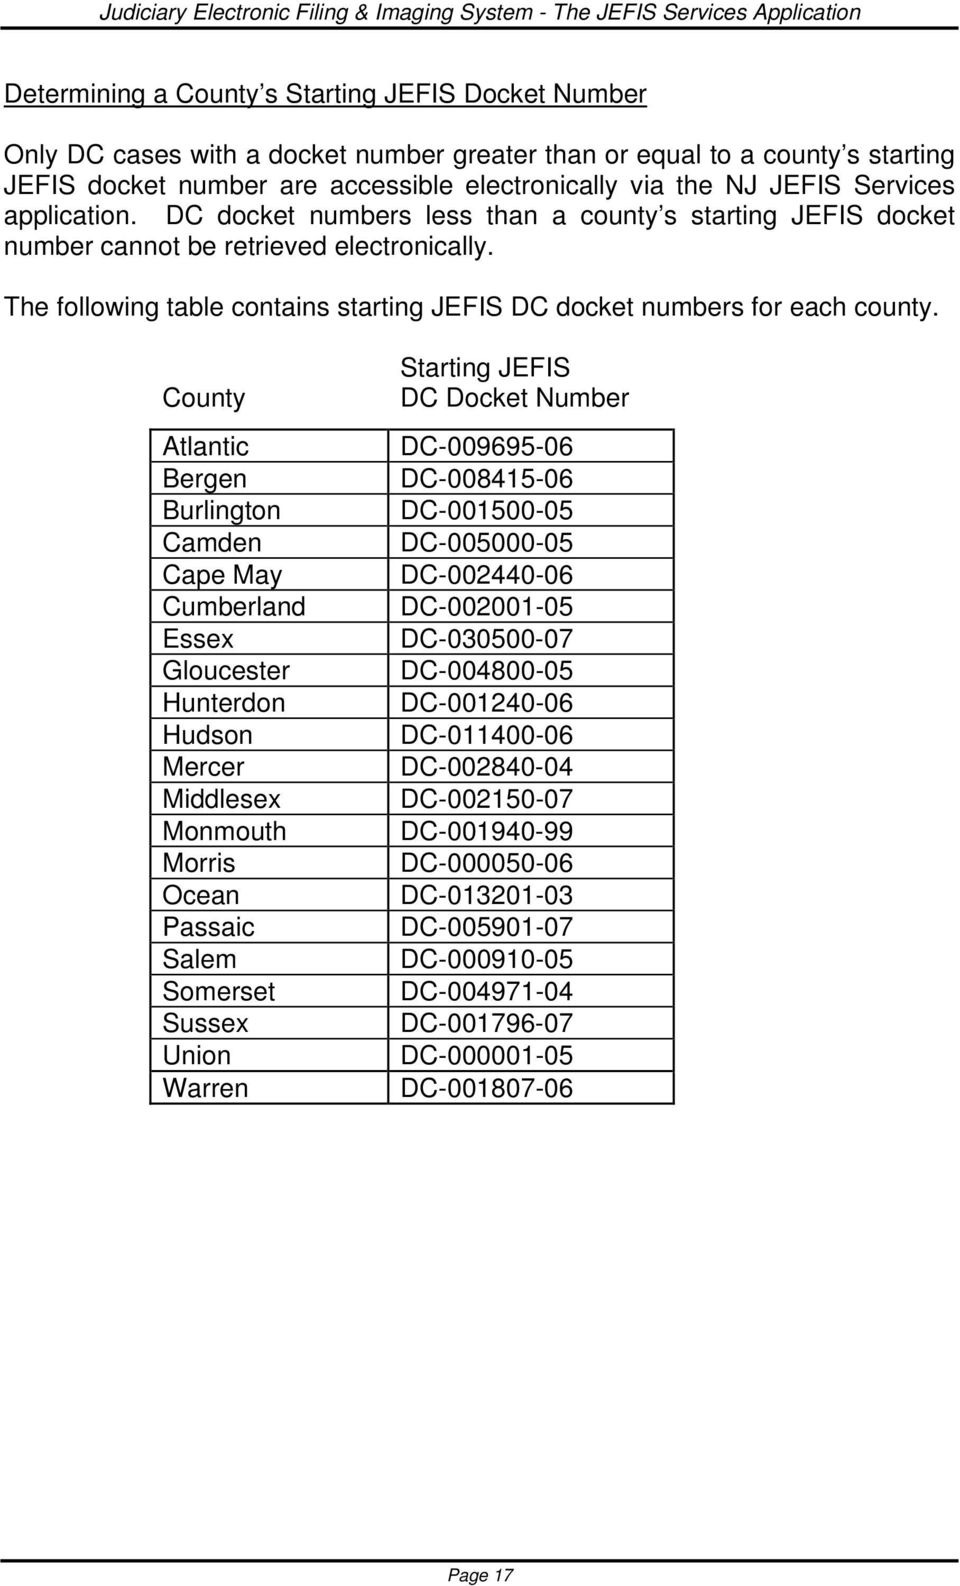 The following table contains starting JEFIS DC docket numbers for each county.